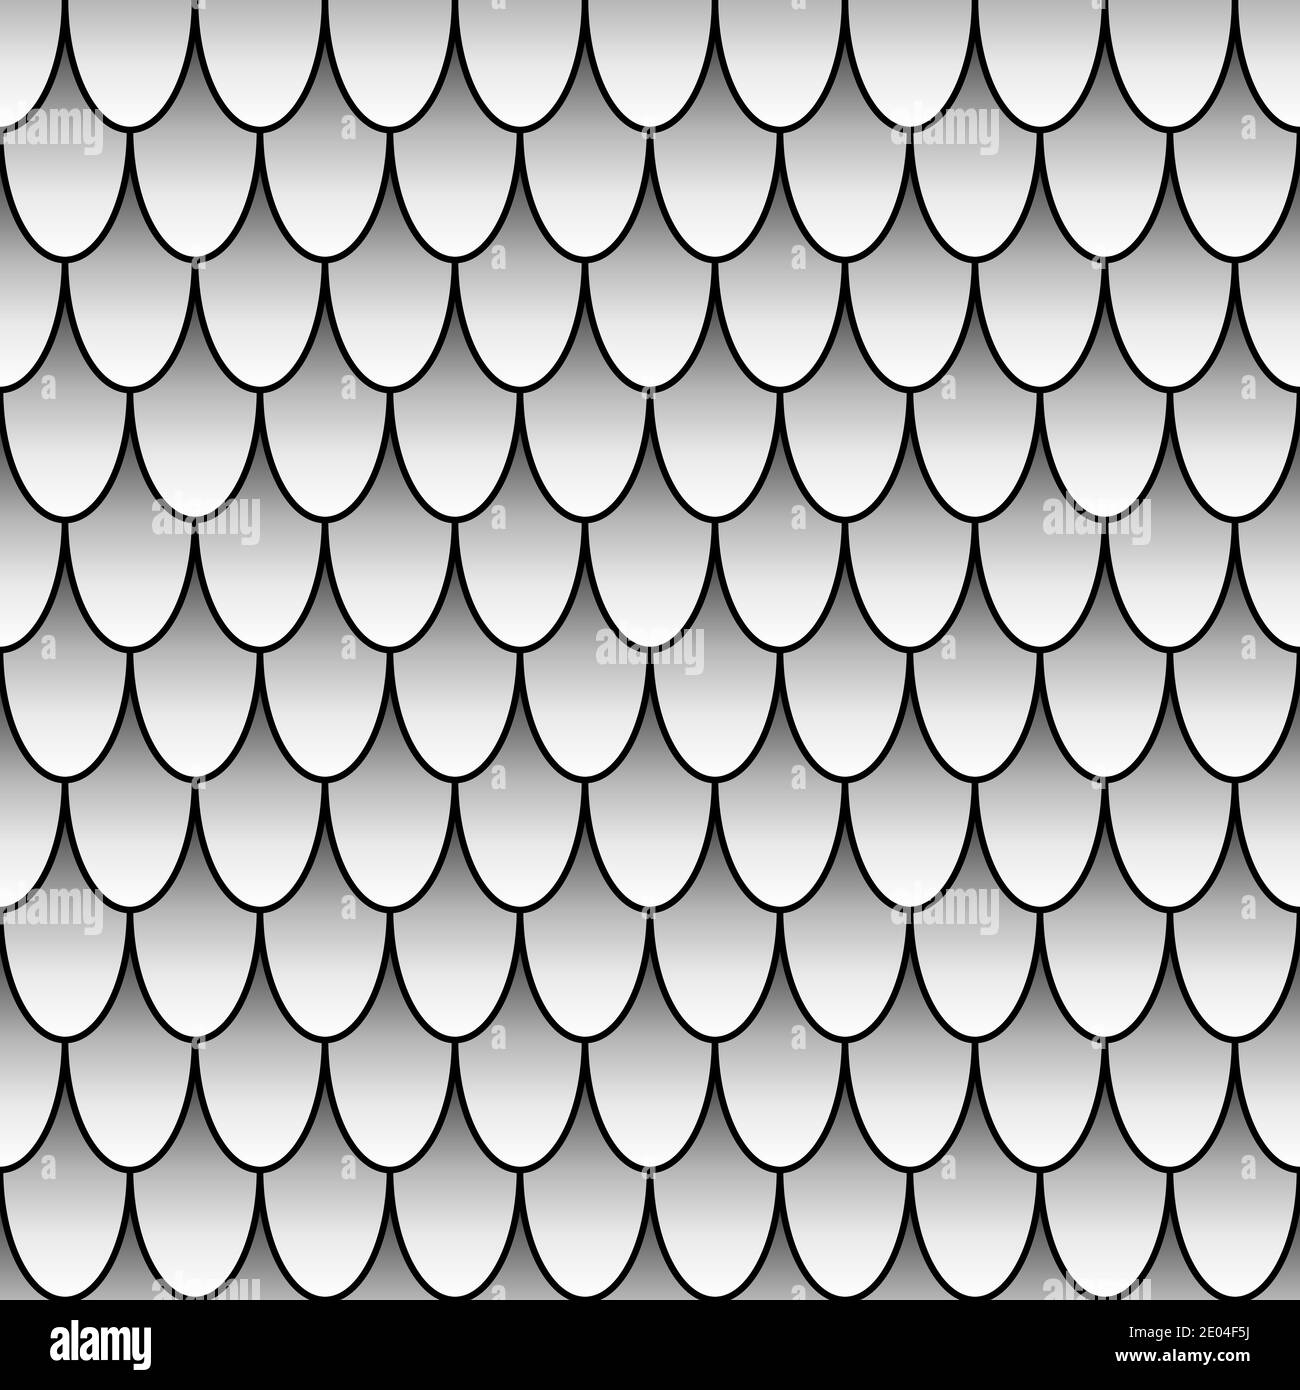 Fish scale pattern vector Black and White Stock Photos & Images